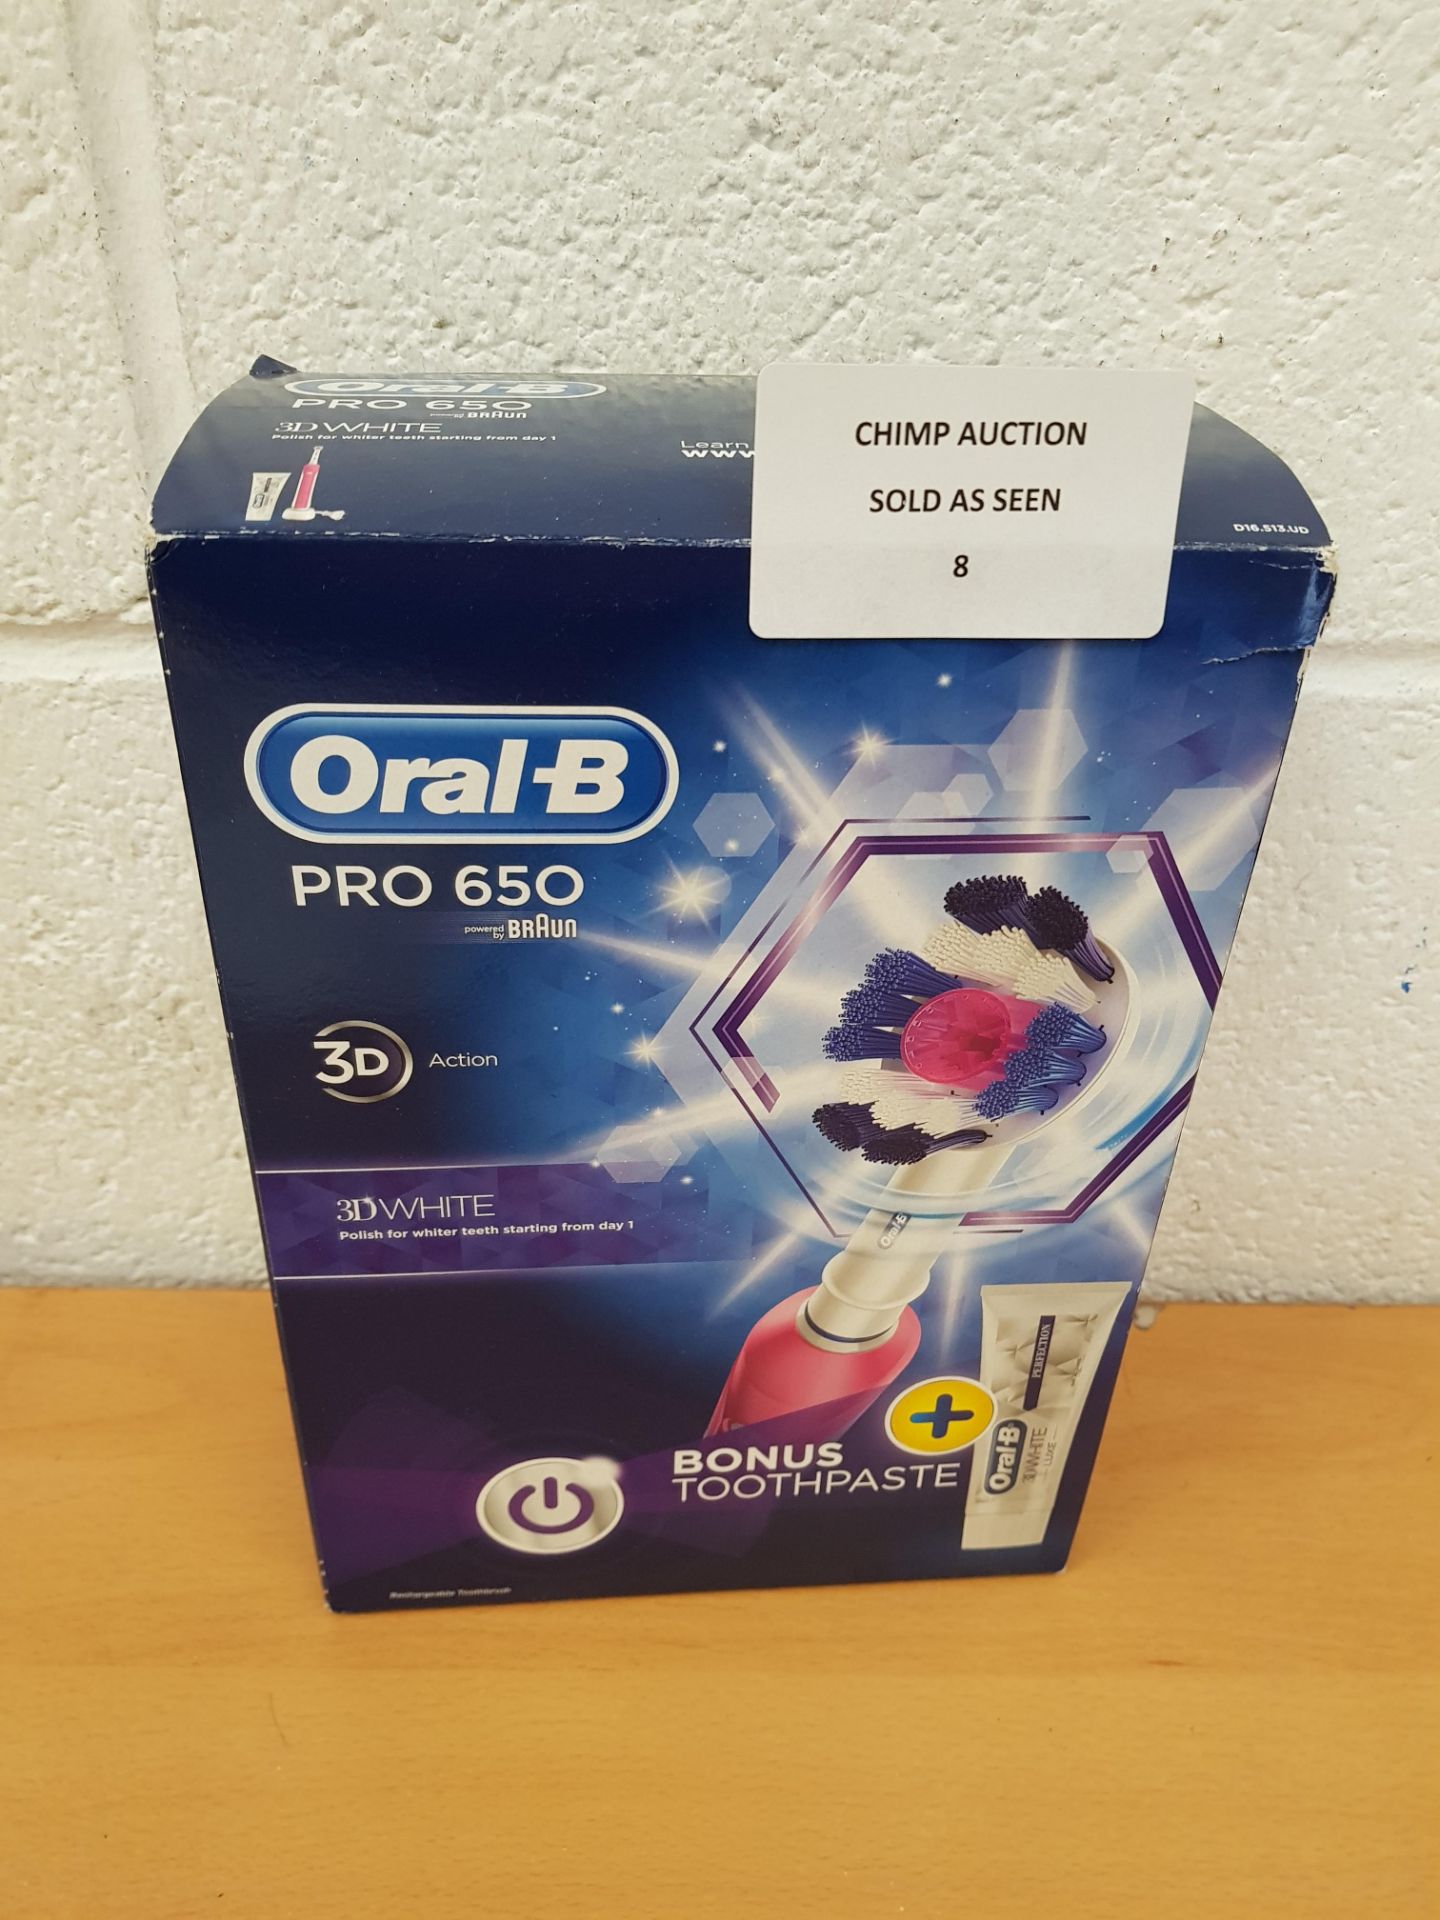 Oral-B Pro 650 3D electric Toothbrush